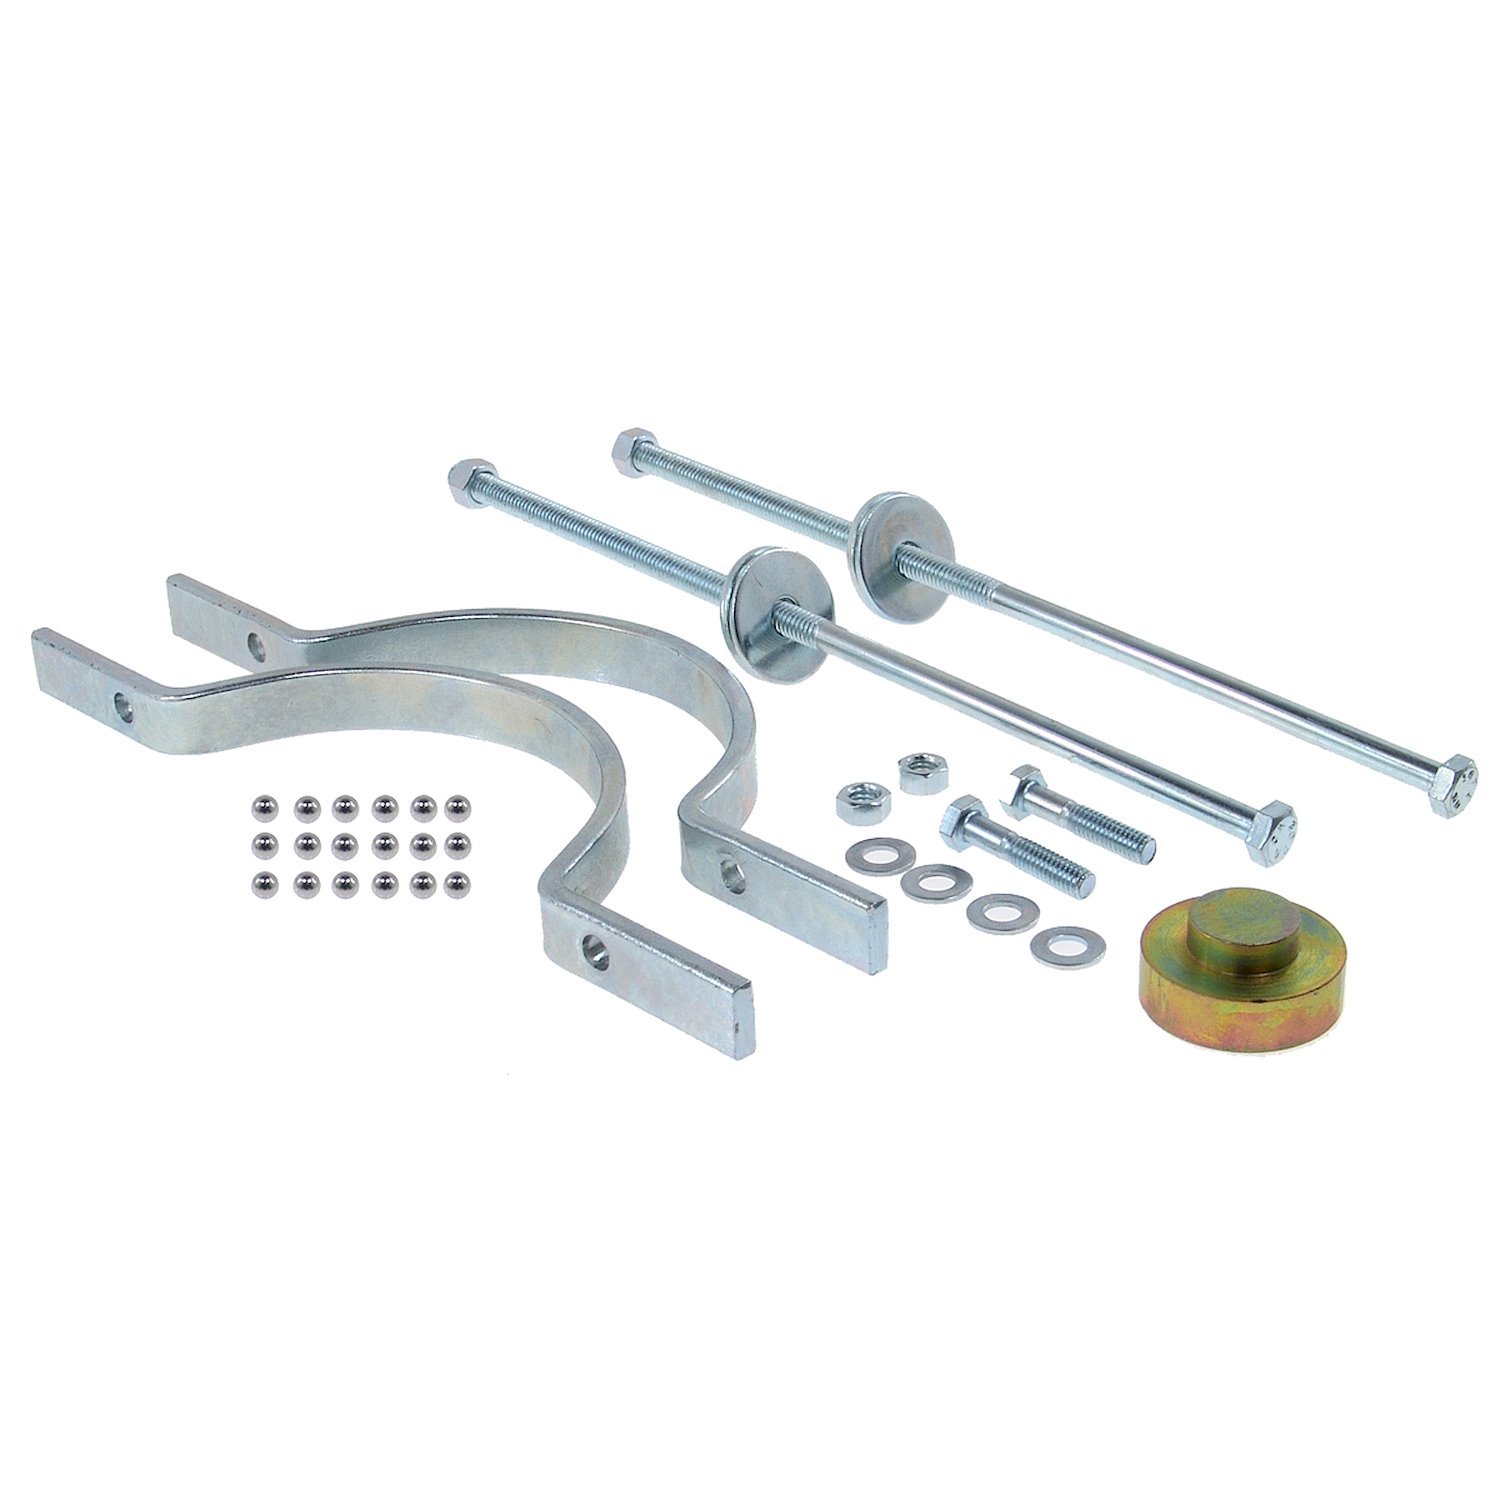 JF011E Pulley Tool Kit